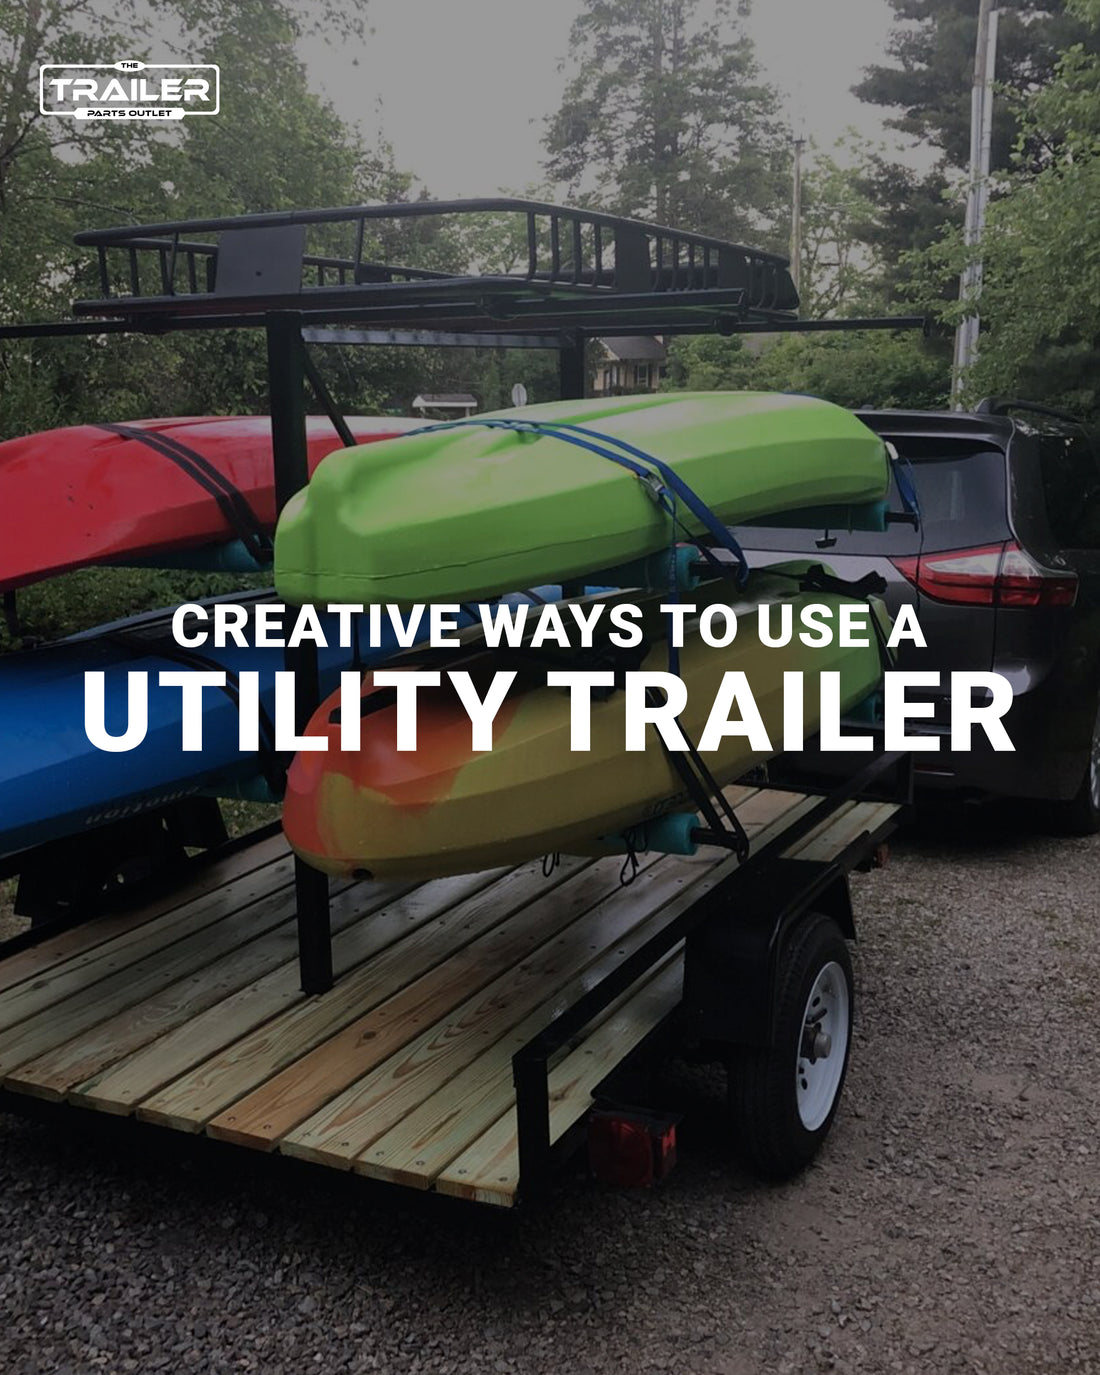 Creative Ways to Use a Utility Trailer